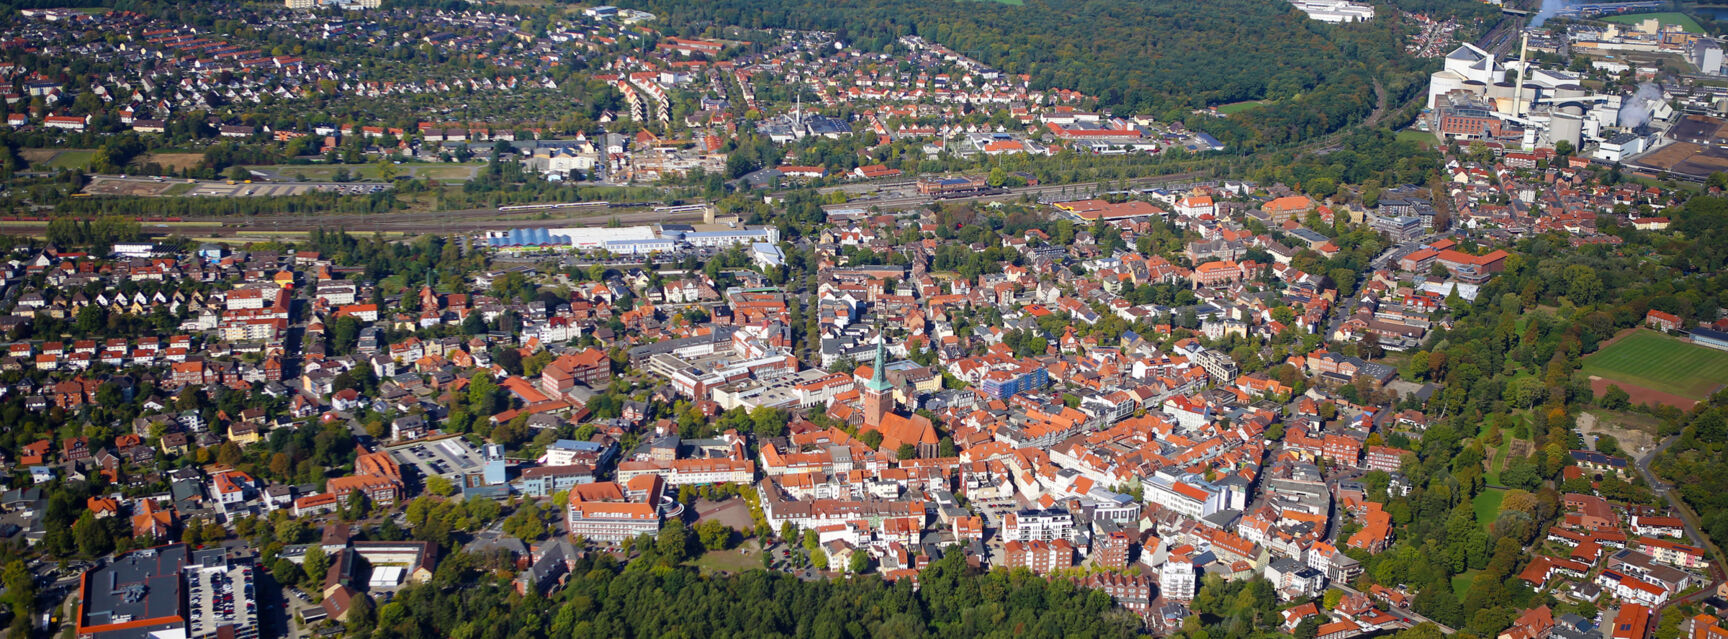 Uelzen from above